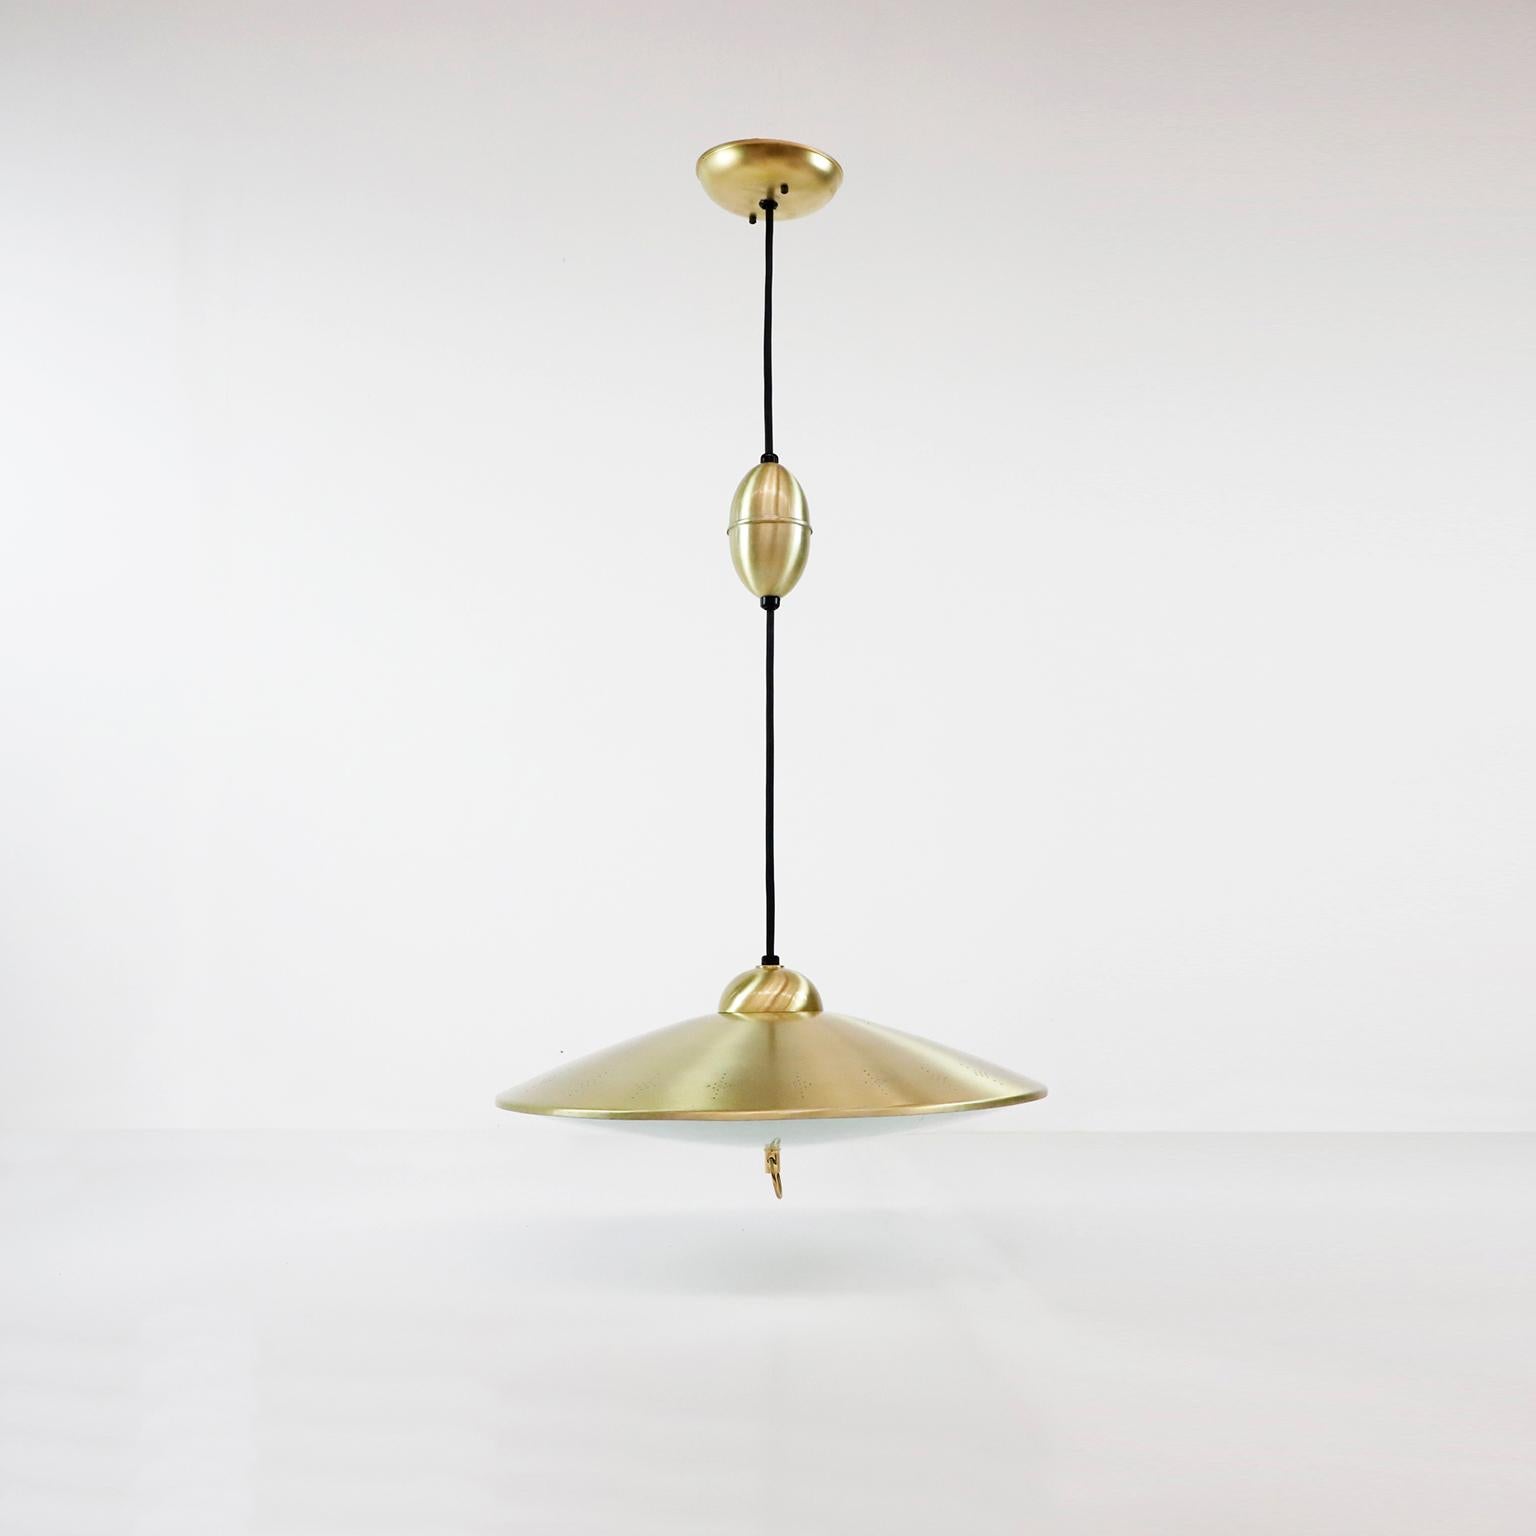 circa 1960. We offere this midcentury Pull Down Pendant Light Fixture. Great vintage conditions and recently restored and the entire electrical system is changed.